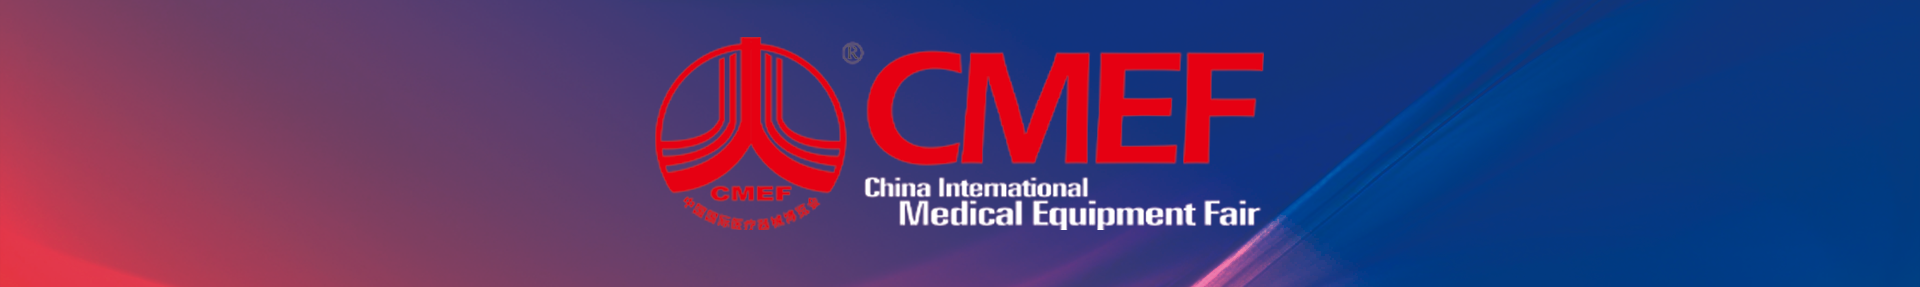 BNS attend the 88th China International Medical Equipment Expo (CMEF) held in Shenzhen.